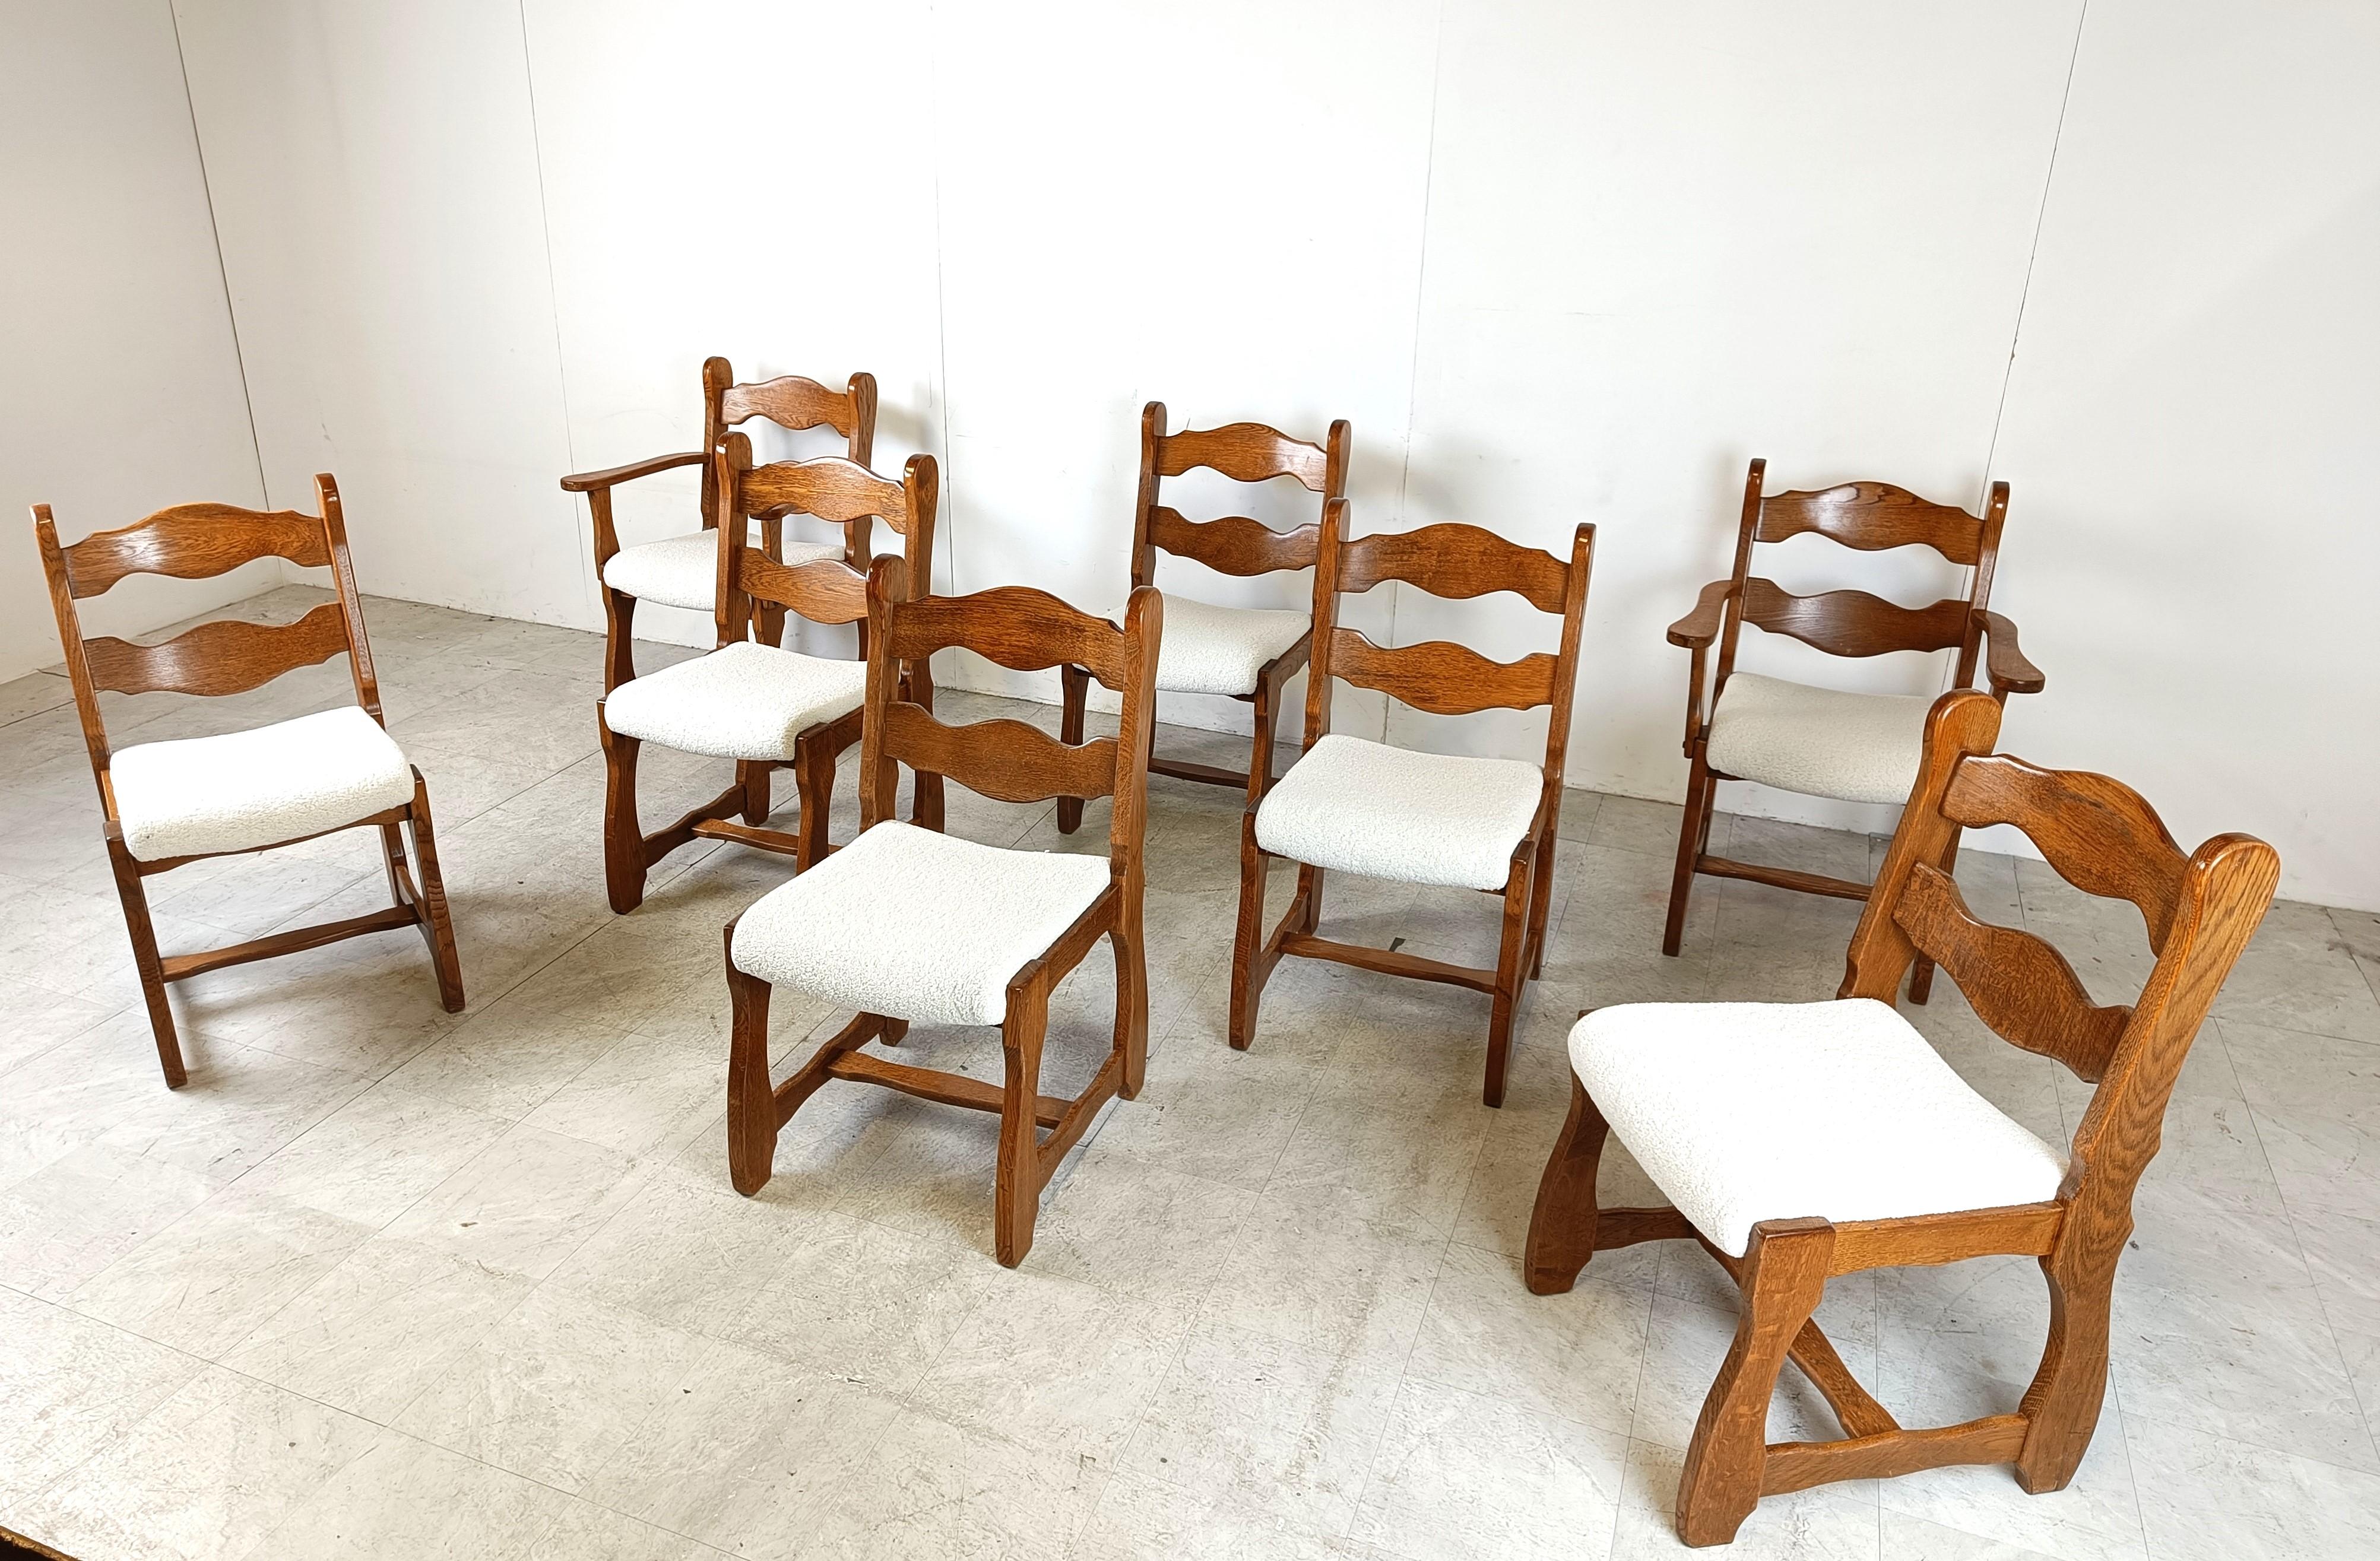 Vintage brutalist dining chairs, set of 8 - 1960s 1